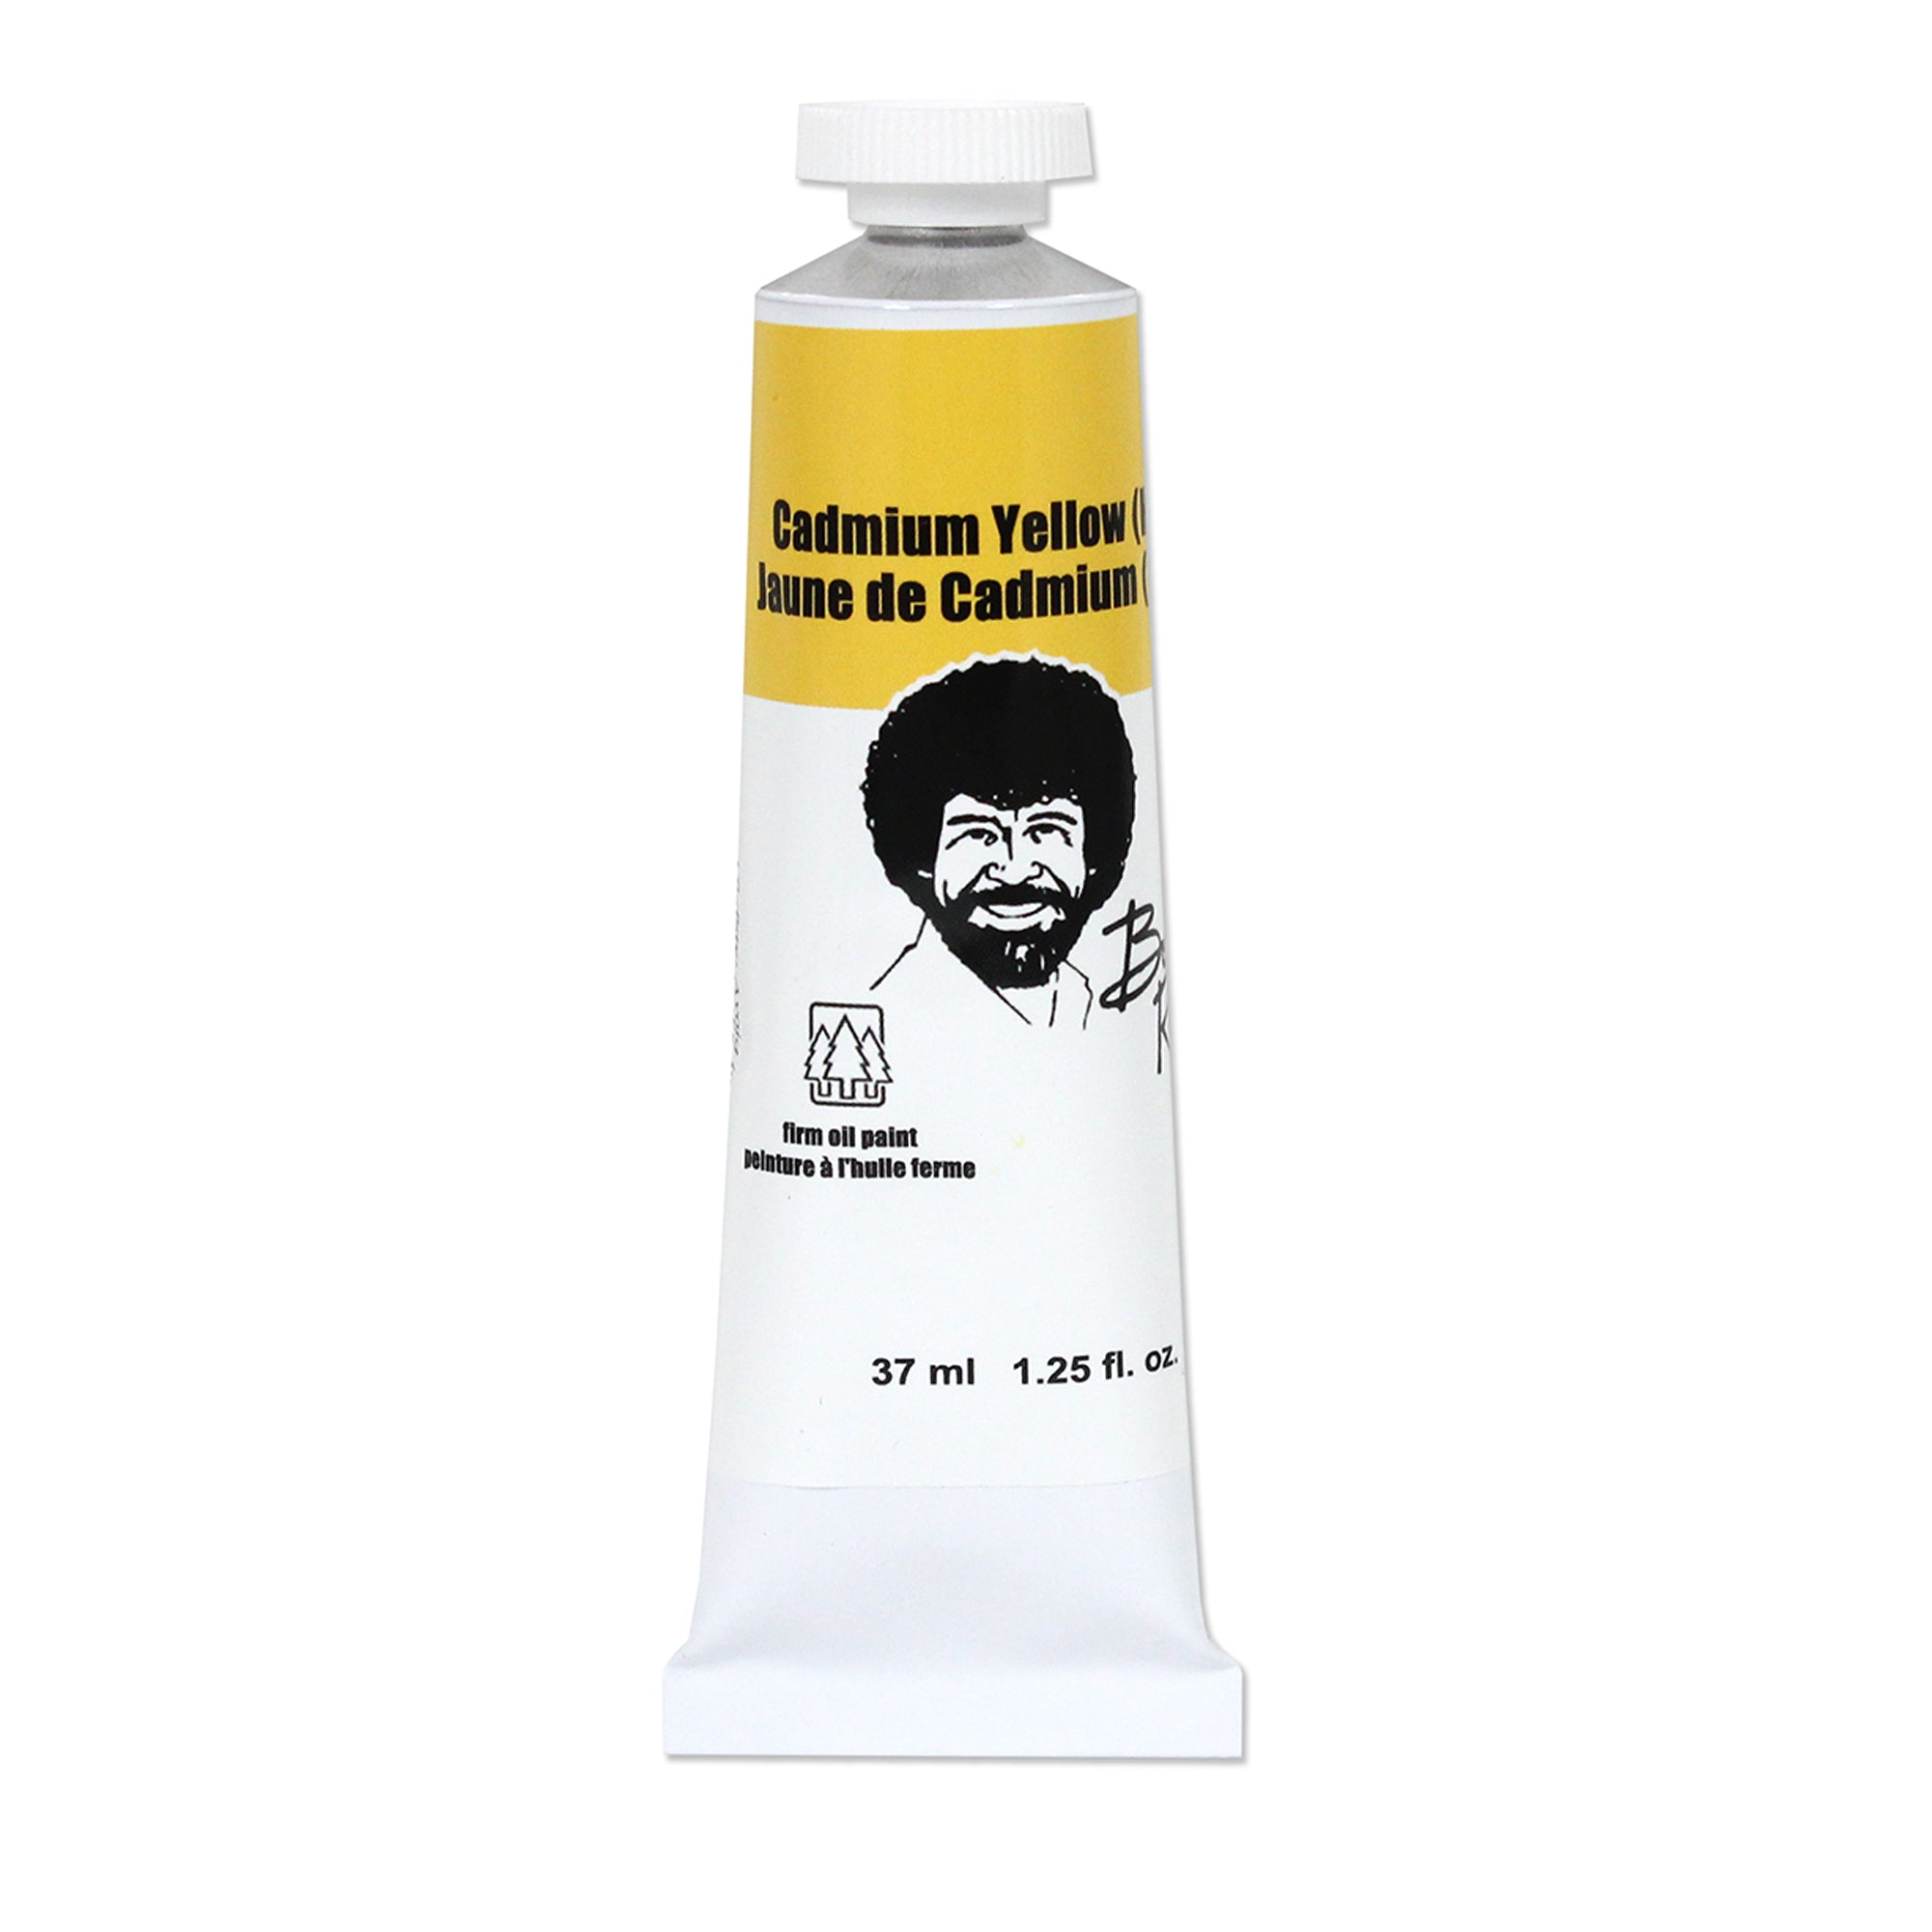 Bob Ross Products 